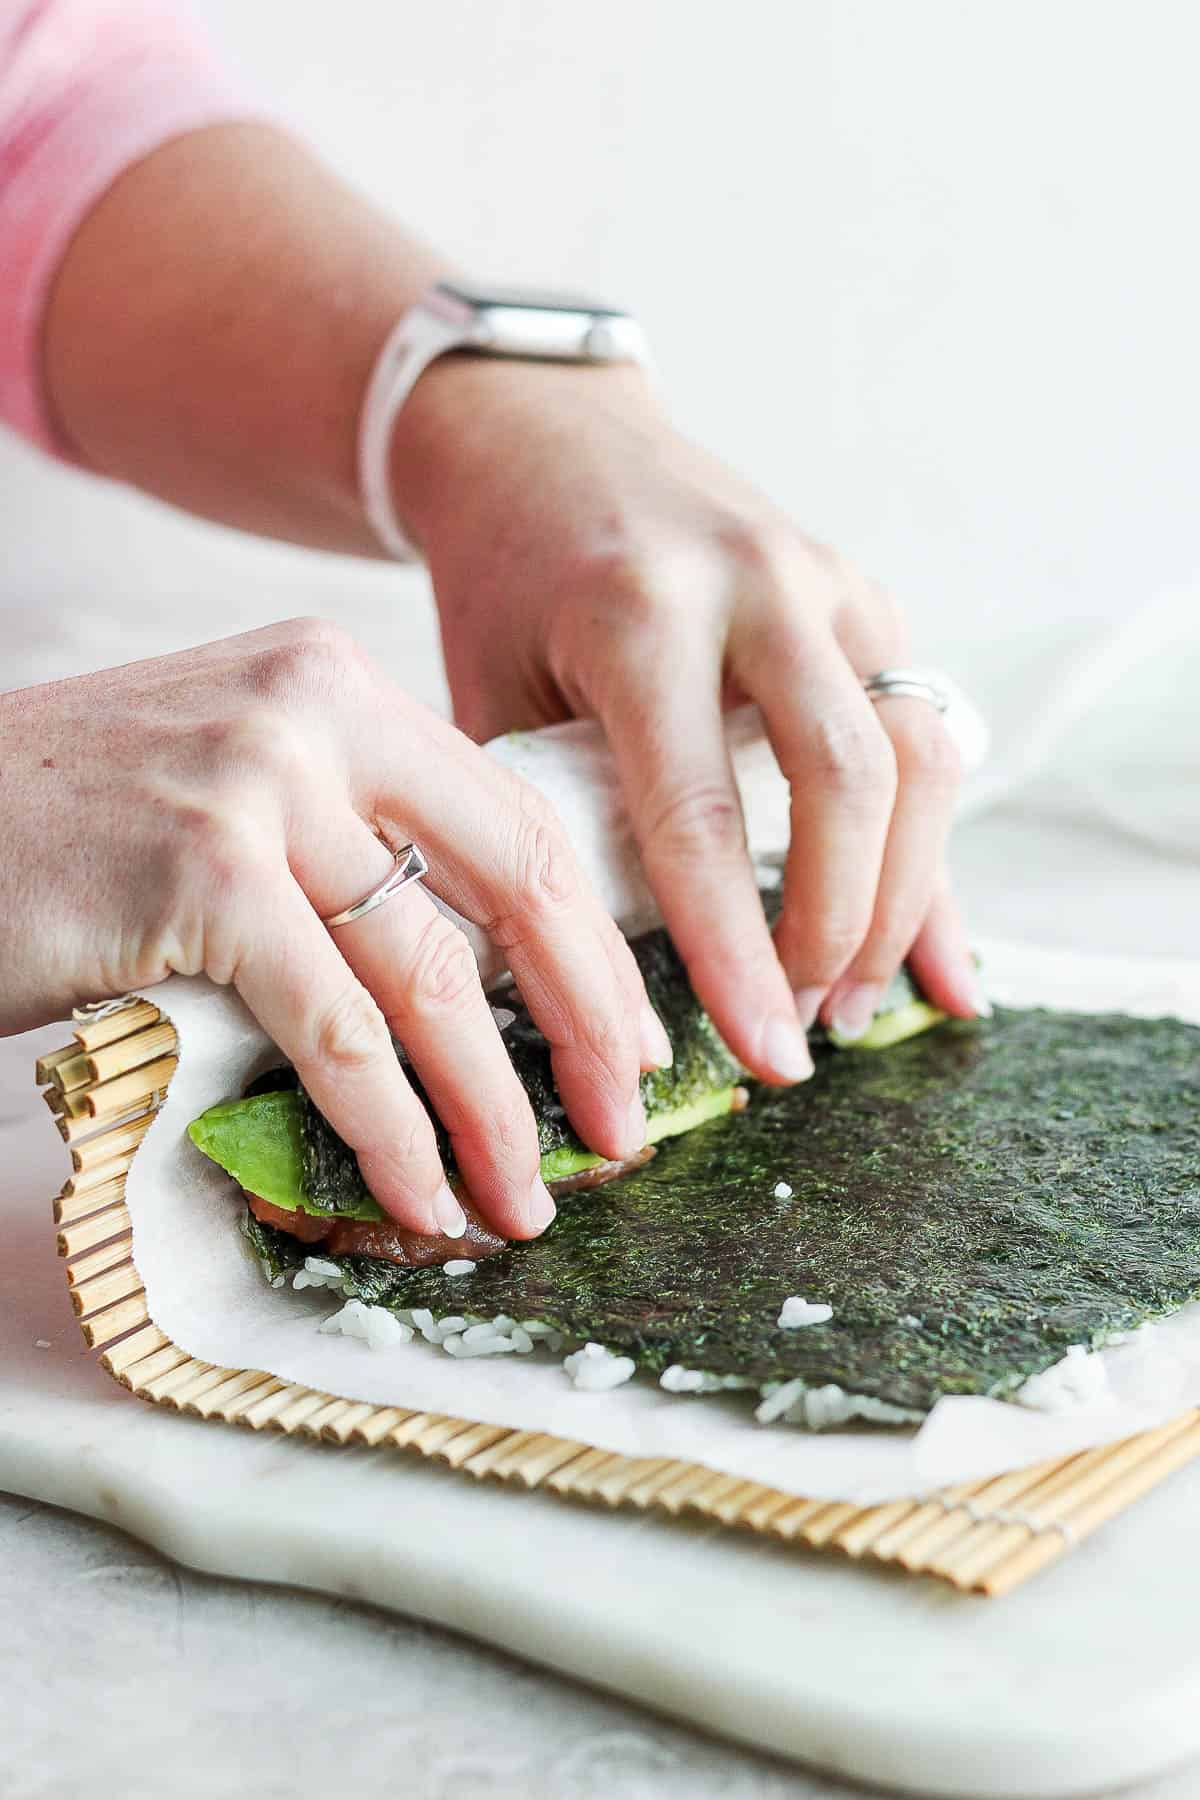 Two hands pulling the nori sheet over the filling ingredients.